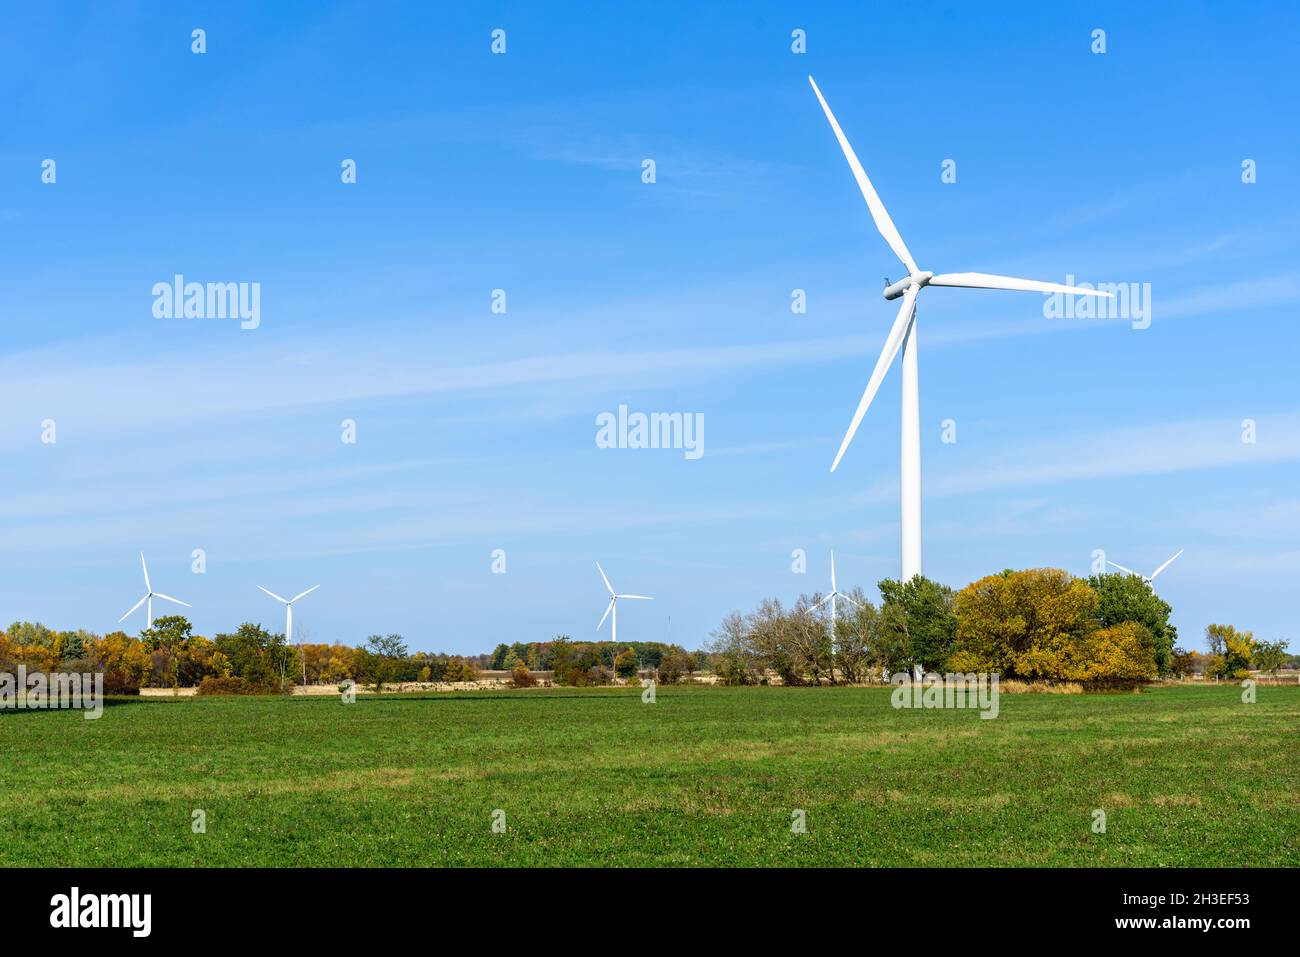 Wind turbine at the far end of a grassy field on a clear autumn day. Other wind turbines are visible in background. Copy space. Stock Photo